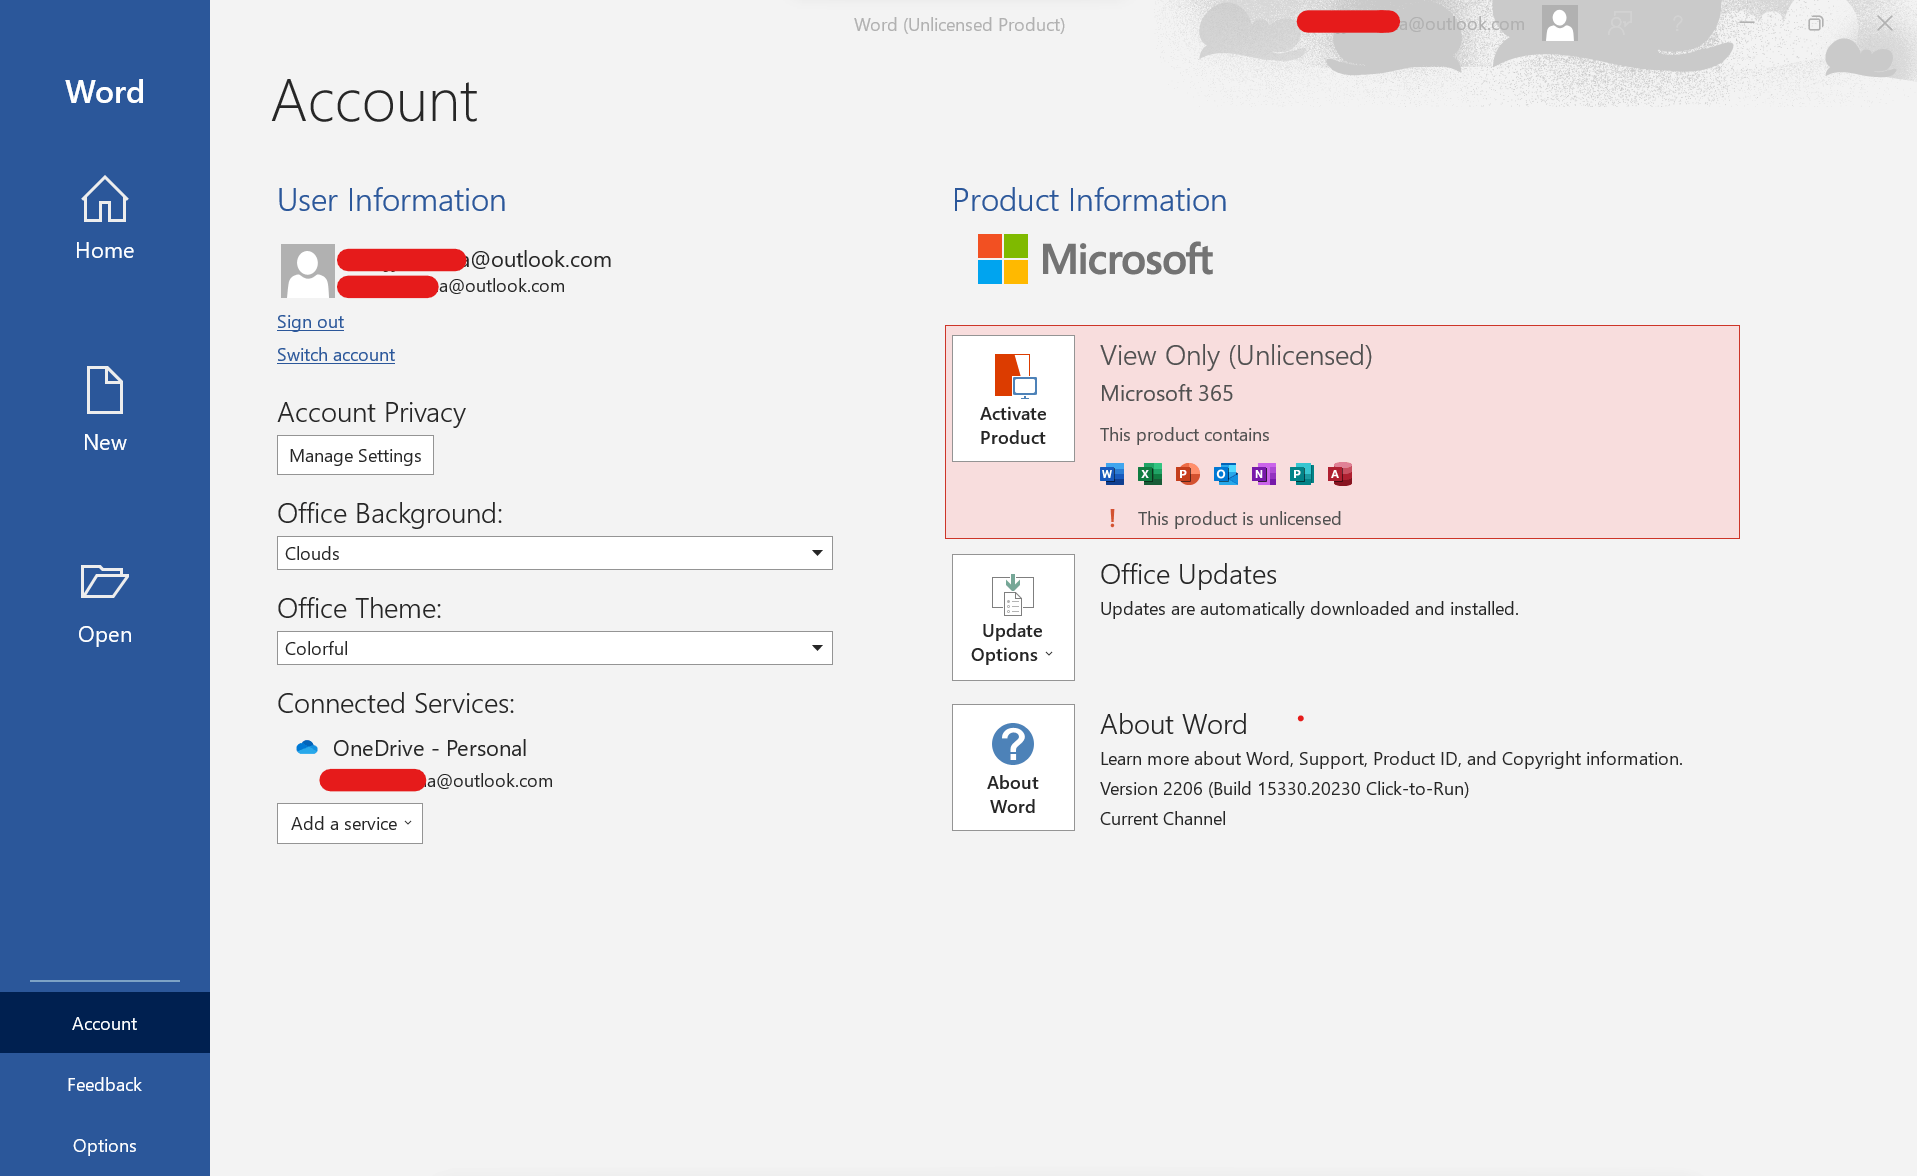 CAN'T ACTIVATE PRE-INSTALLED MS OFFICE HOME & STUDENT EDITION IN NEW -  Microsoft Community